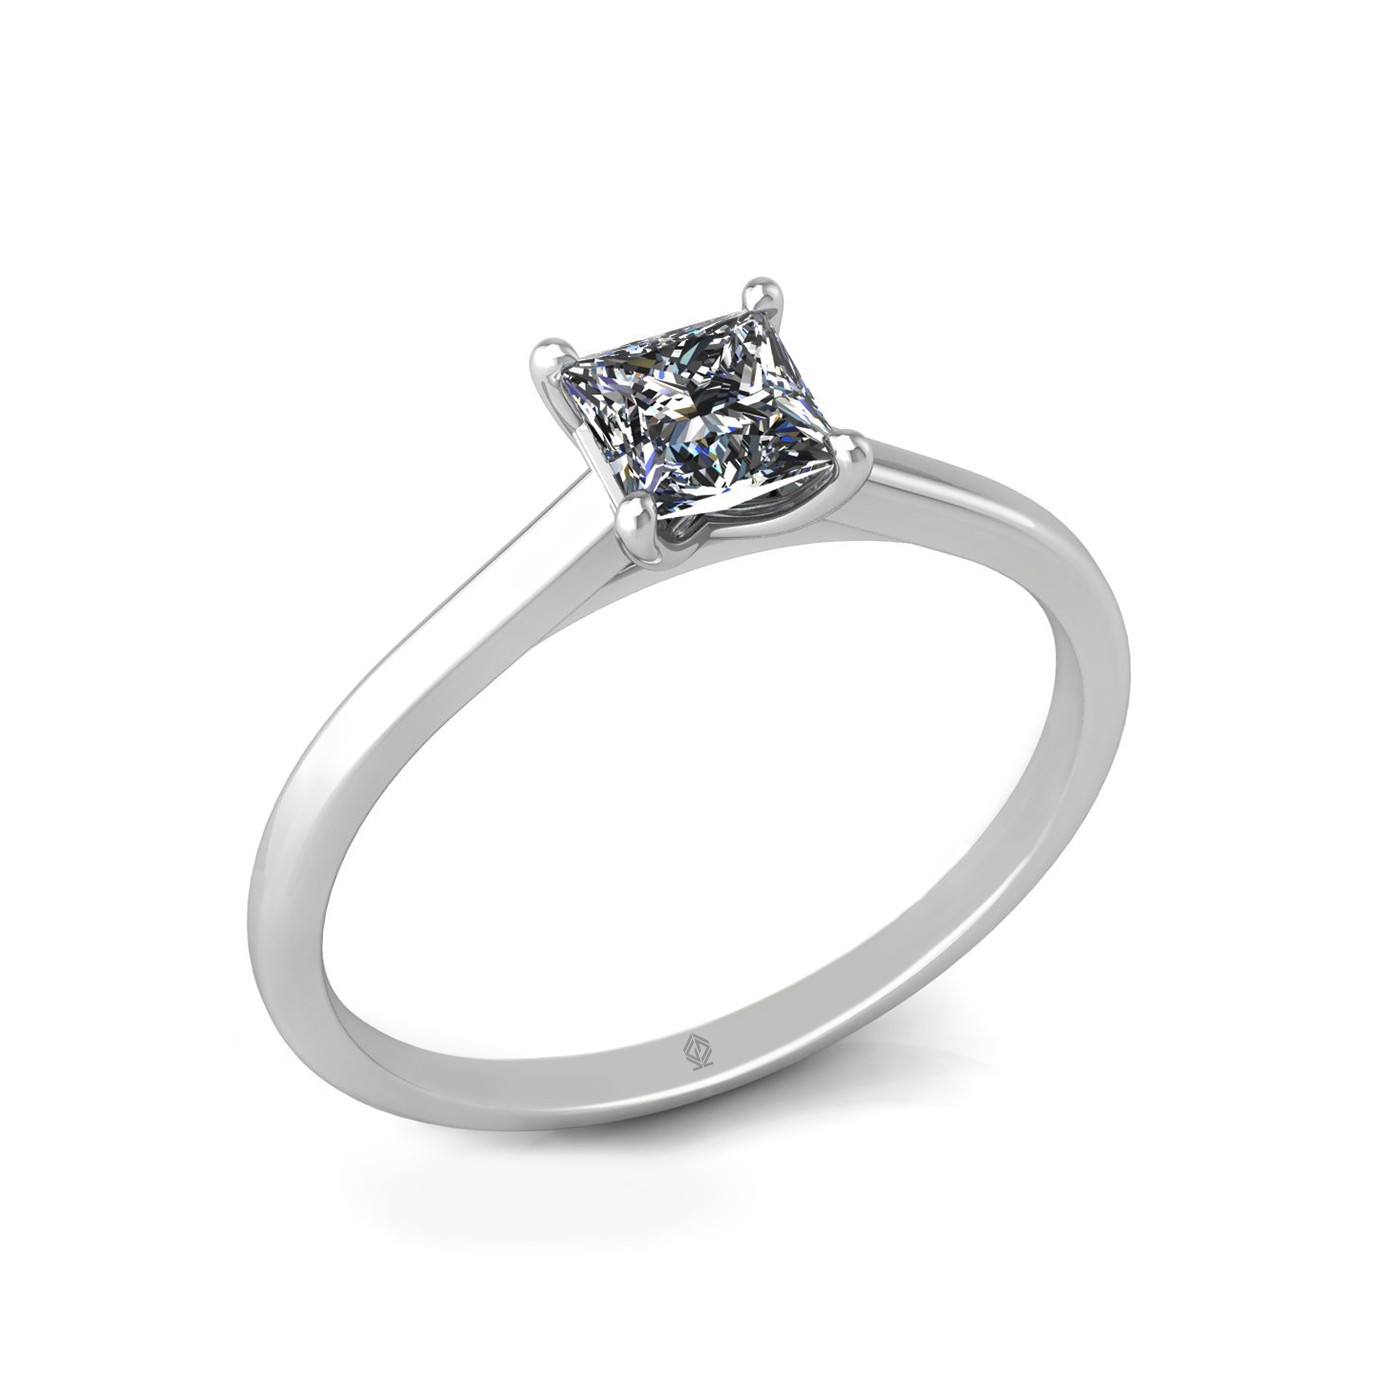 18k white gold  0,50 ct 4 prongs solitaire princess cut diamond engagement ring with whisper thin band